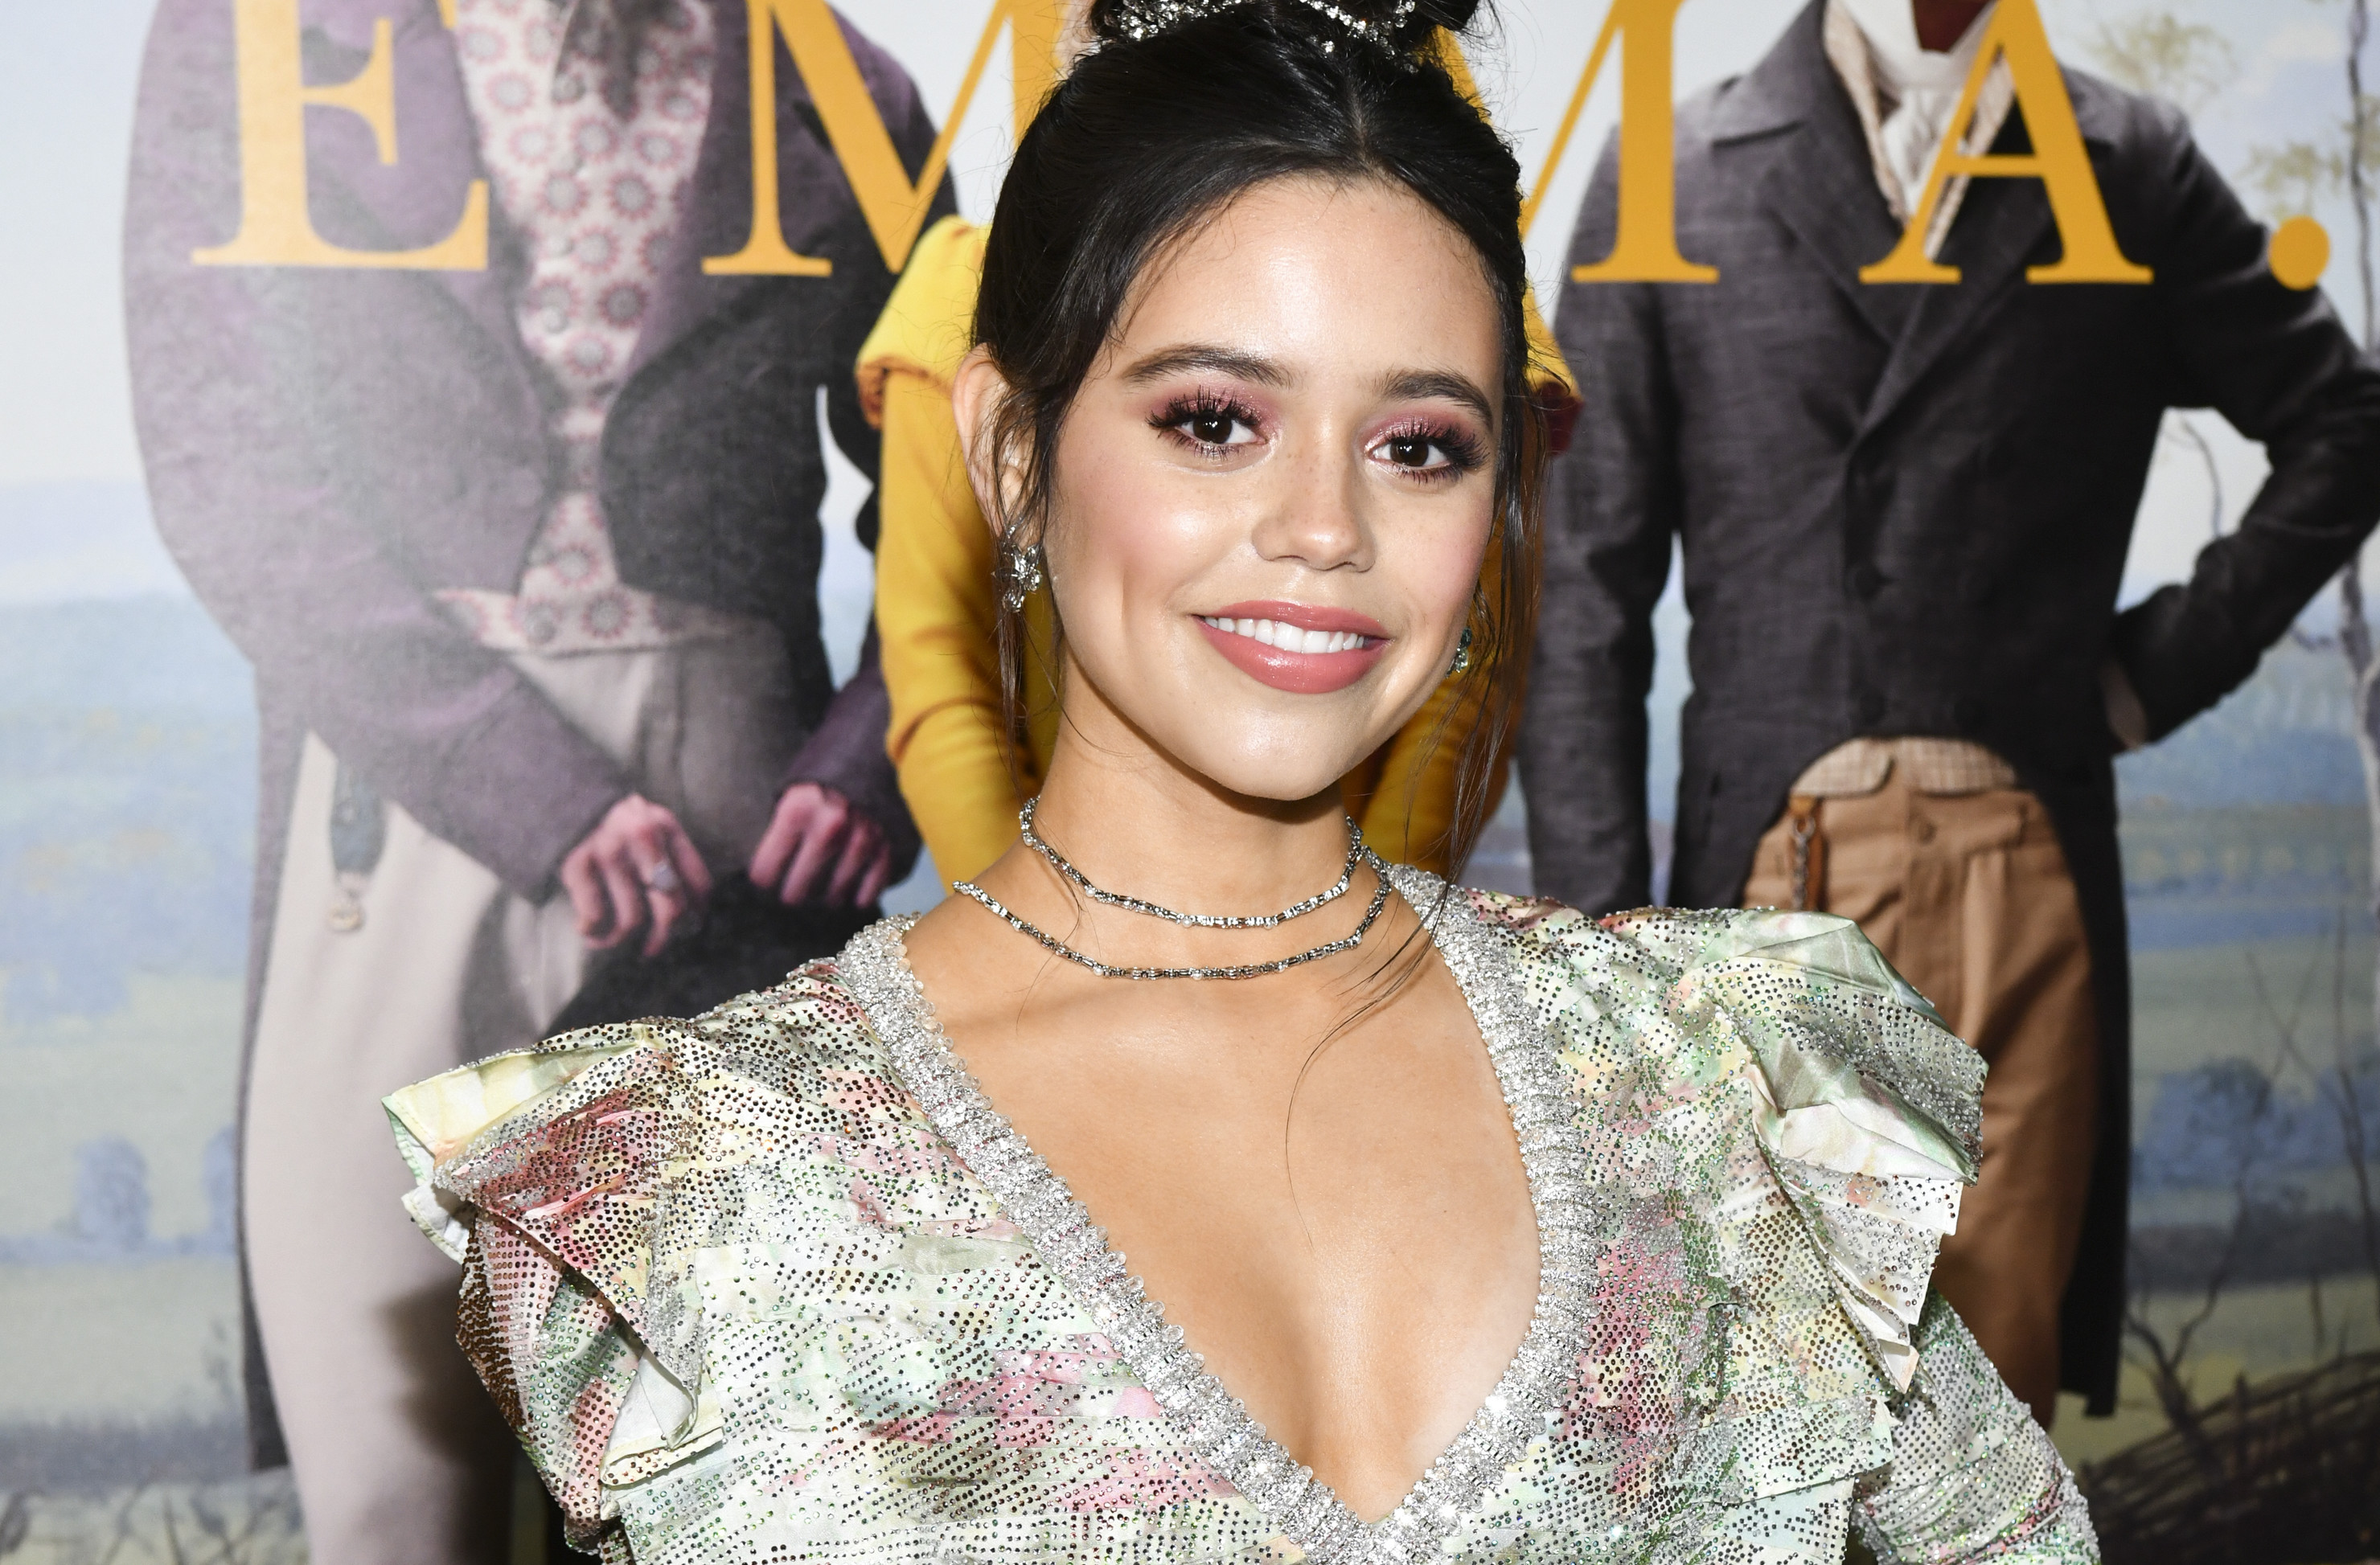 Xx Xx Videos Com Phul Hd - Jenna Ortega Opens Up About Her Role in A24's New Horror Film 'X' | Complex